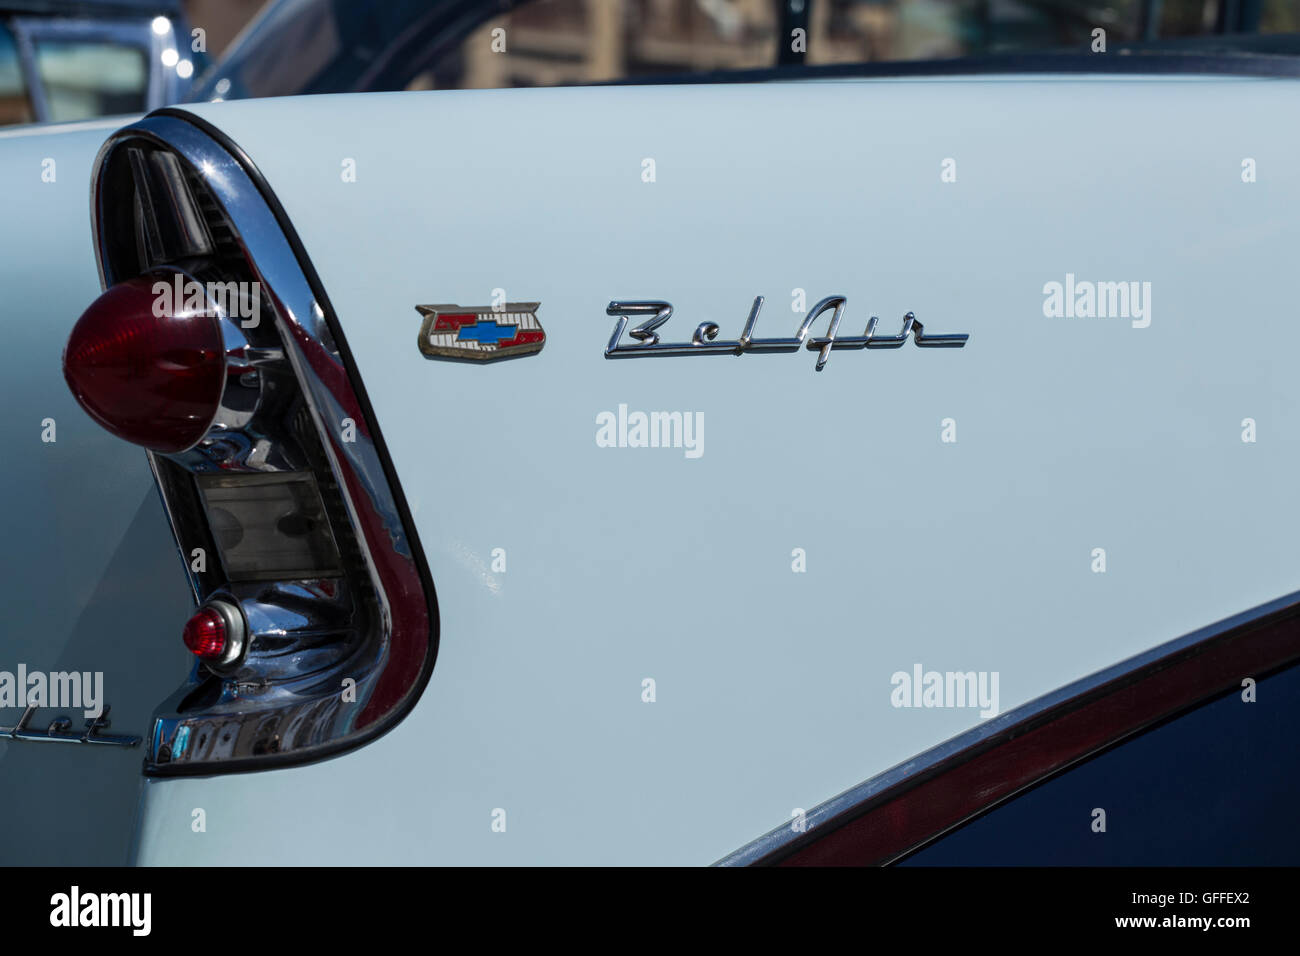 Pale blue tail fin and rear lights of a Chevrolet Belair car Stock Photo